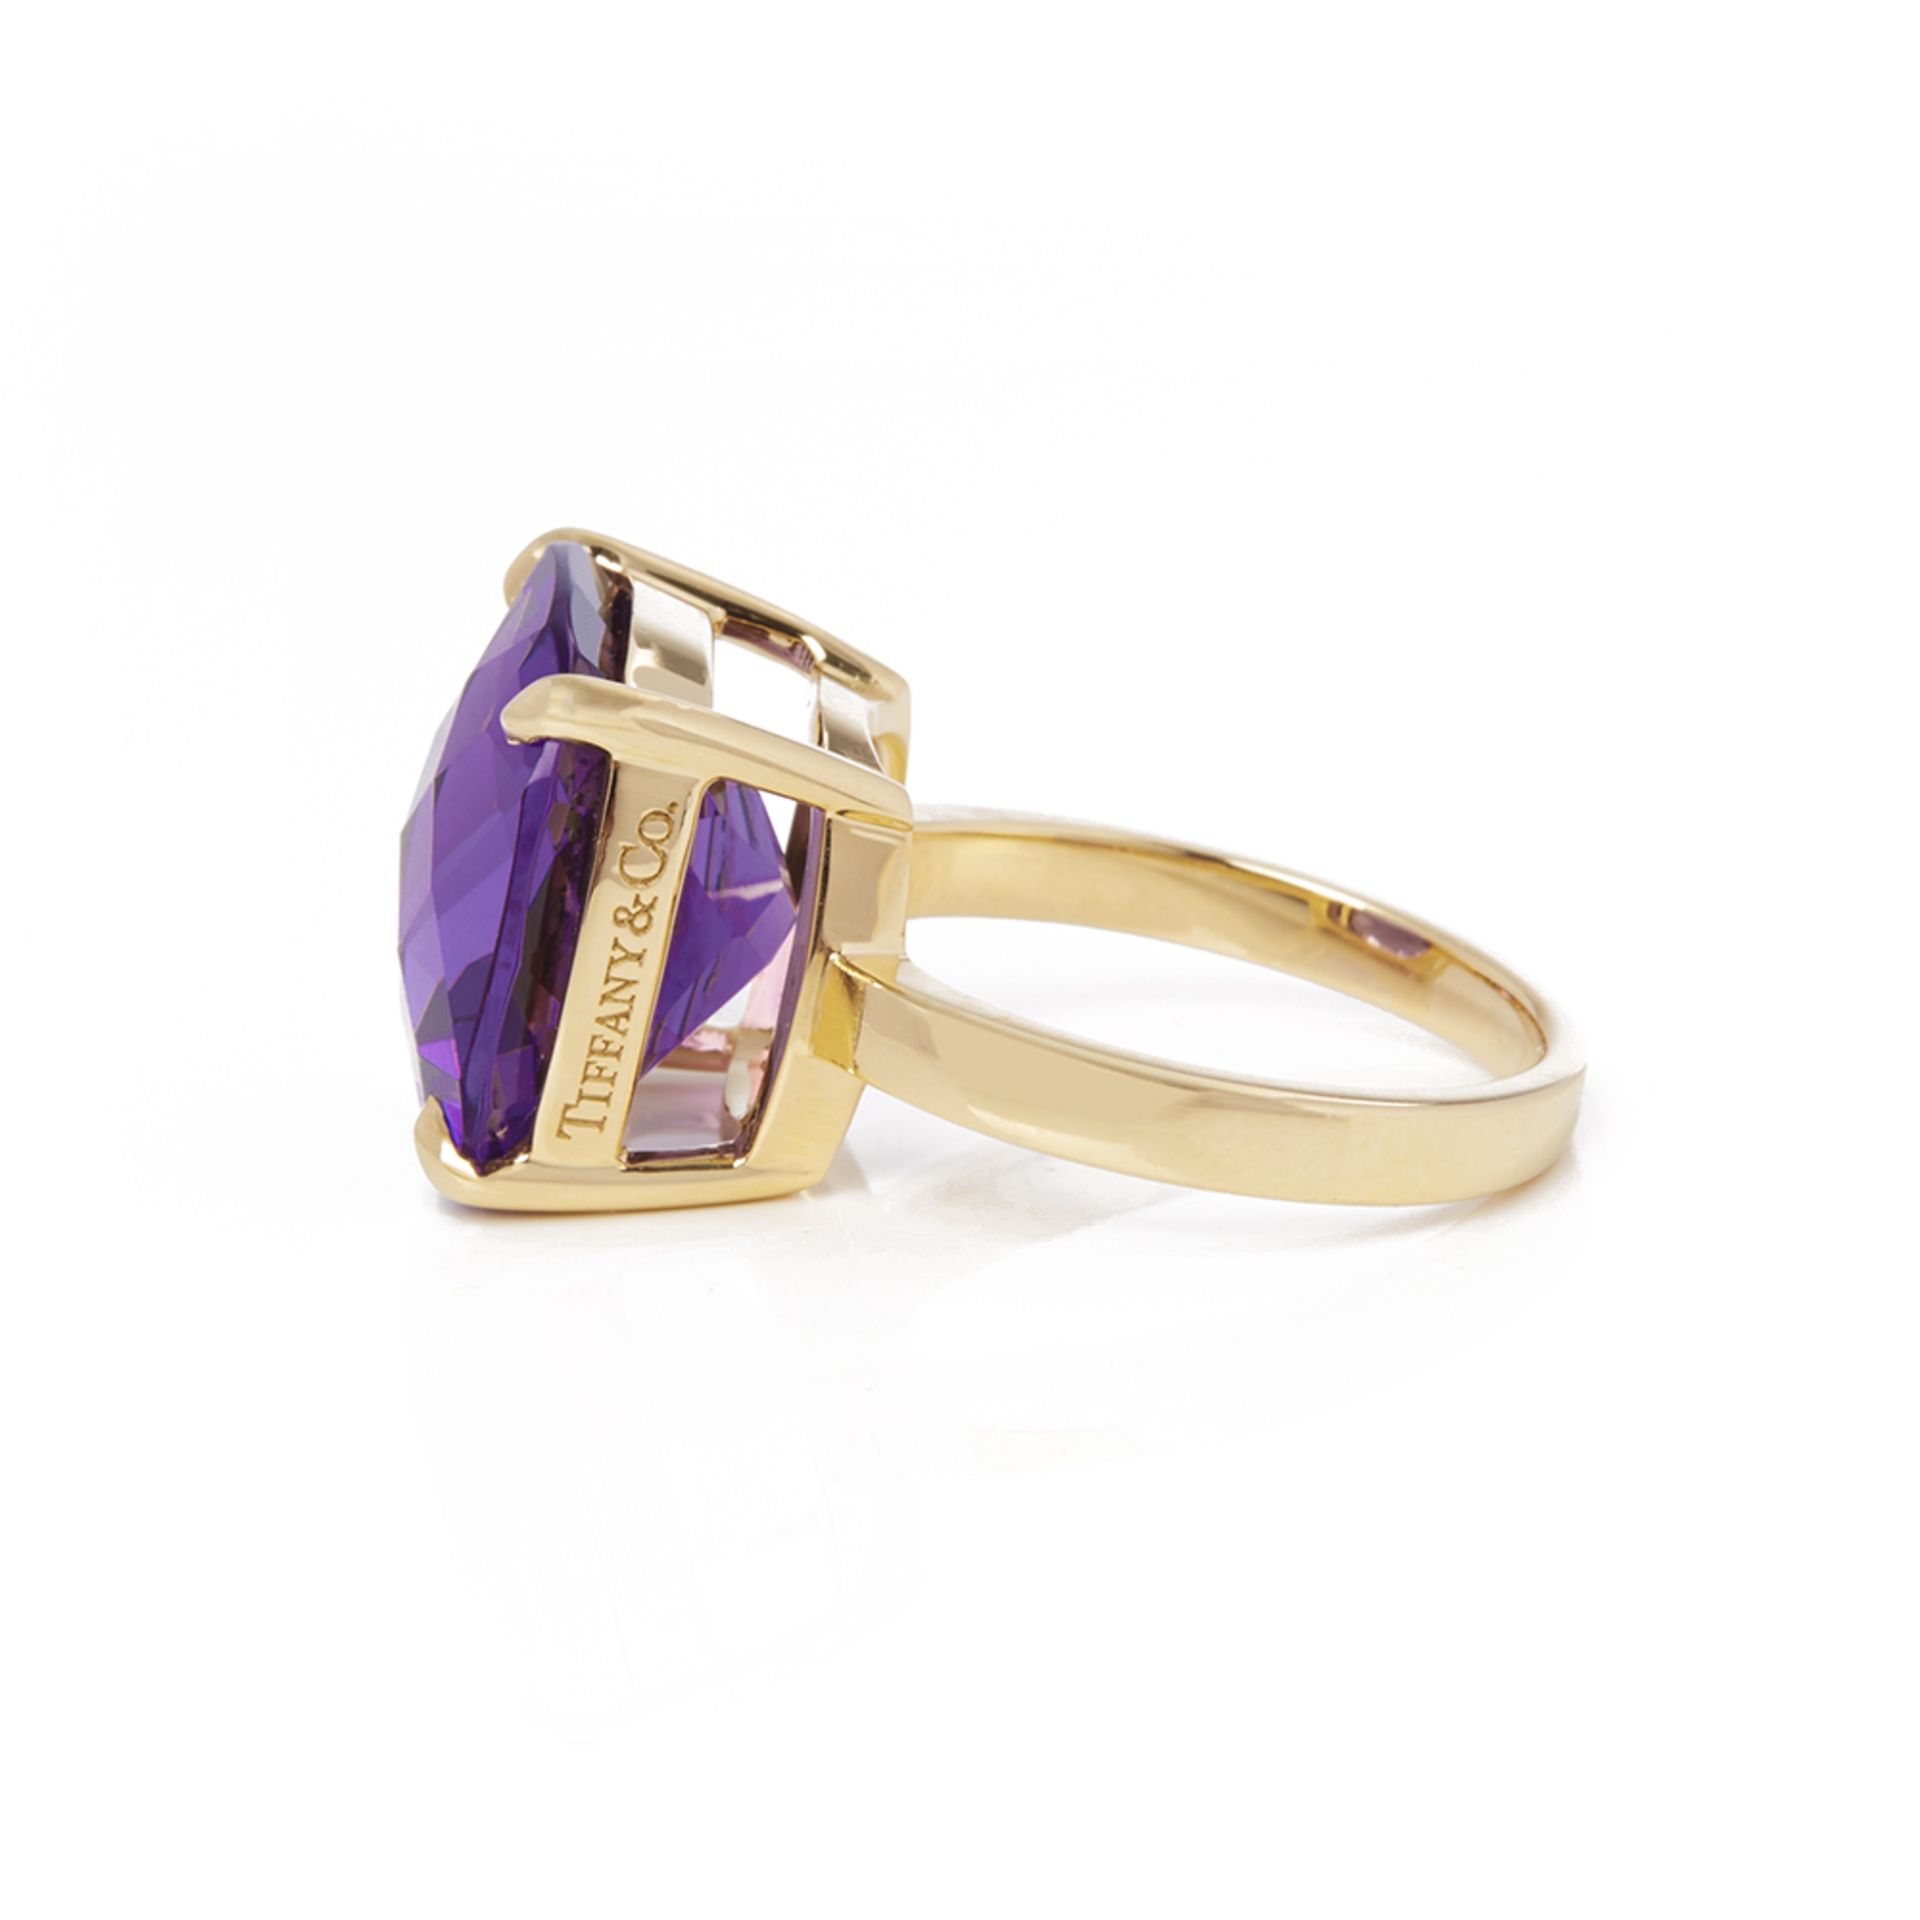 Tiffany & Co. 18k Yellow Gold Amethyst Sparkler Ring - Image 4 of 7